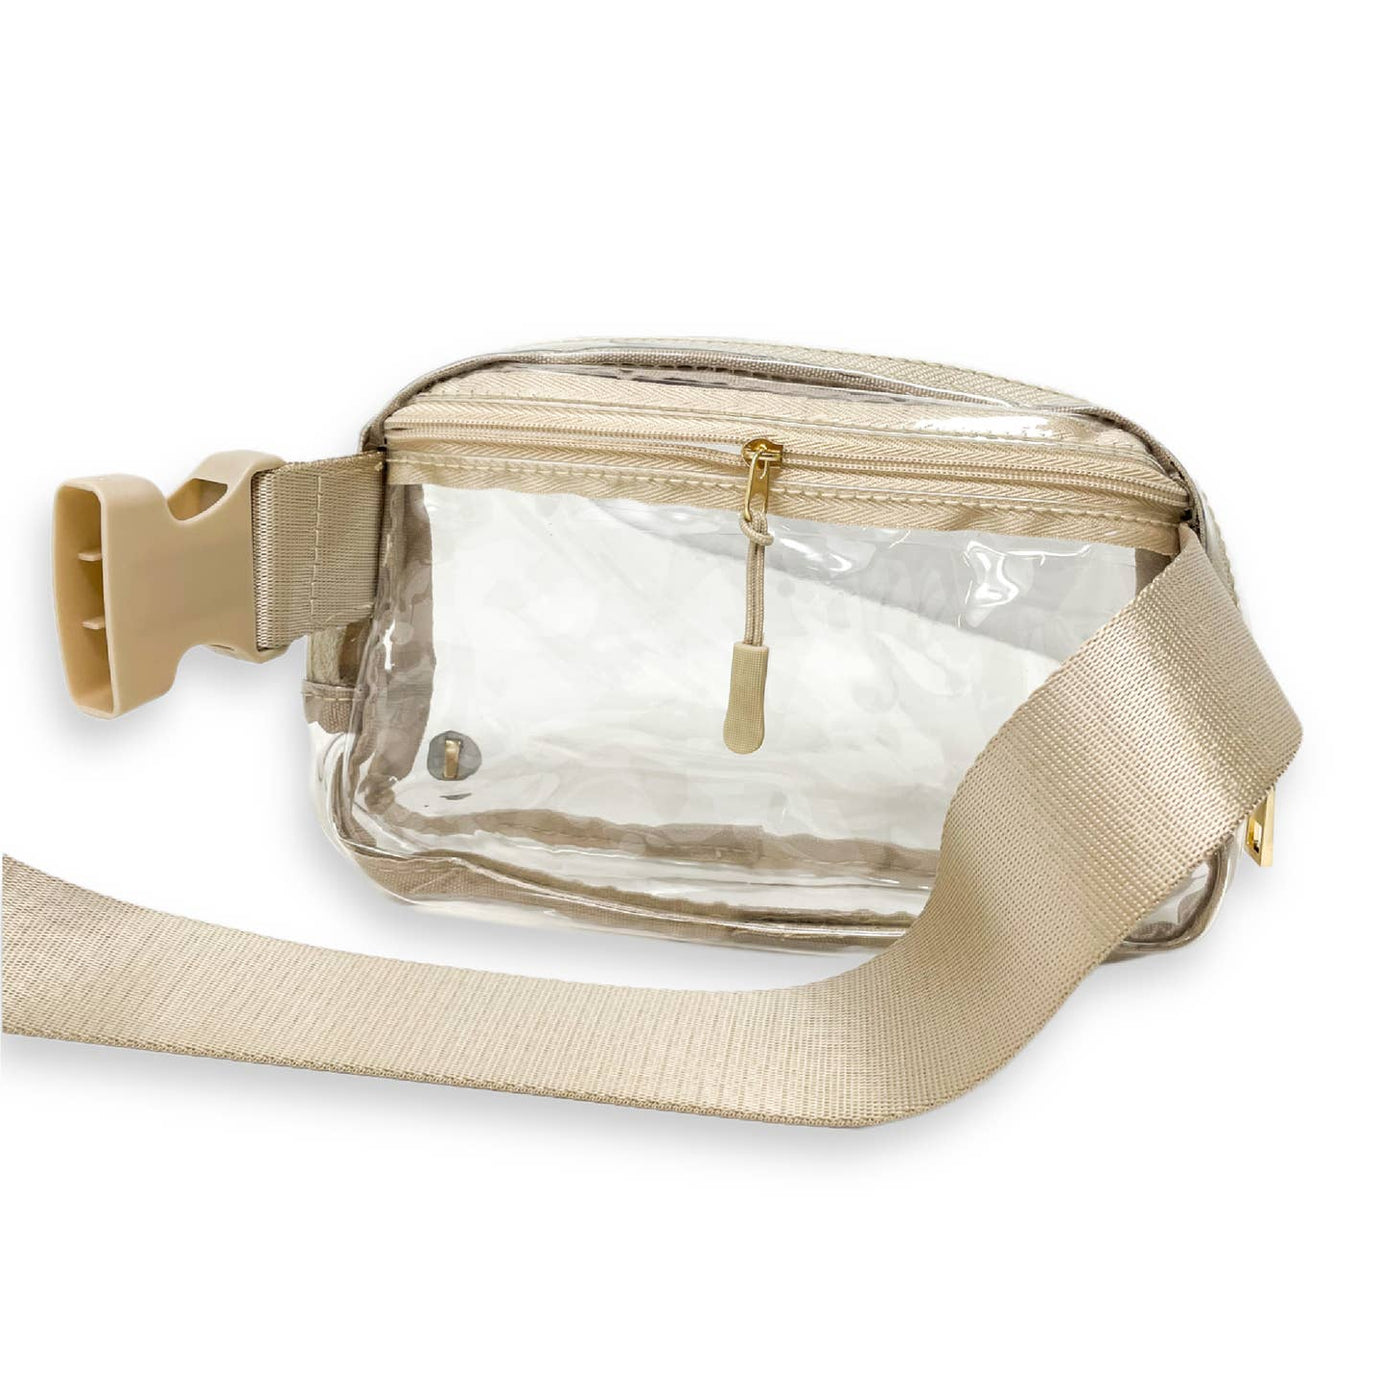 Clear Stadium All You Need Belt Bag- Natural Beige